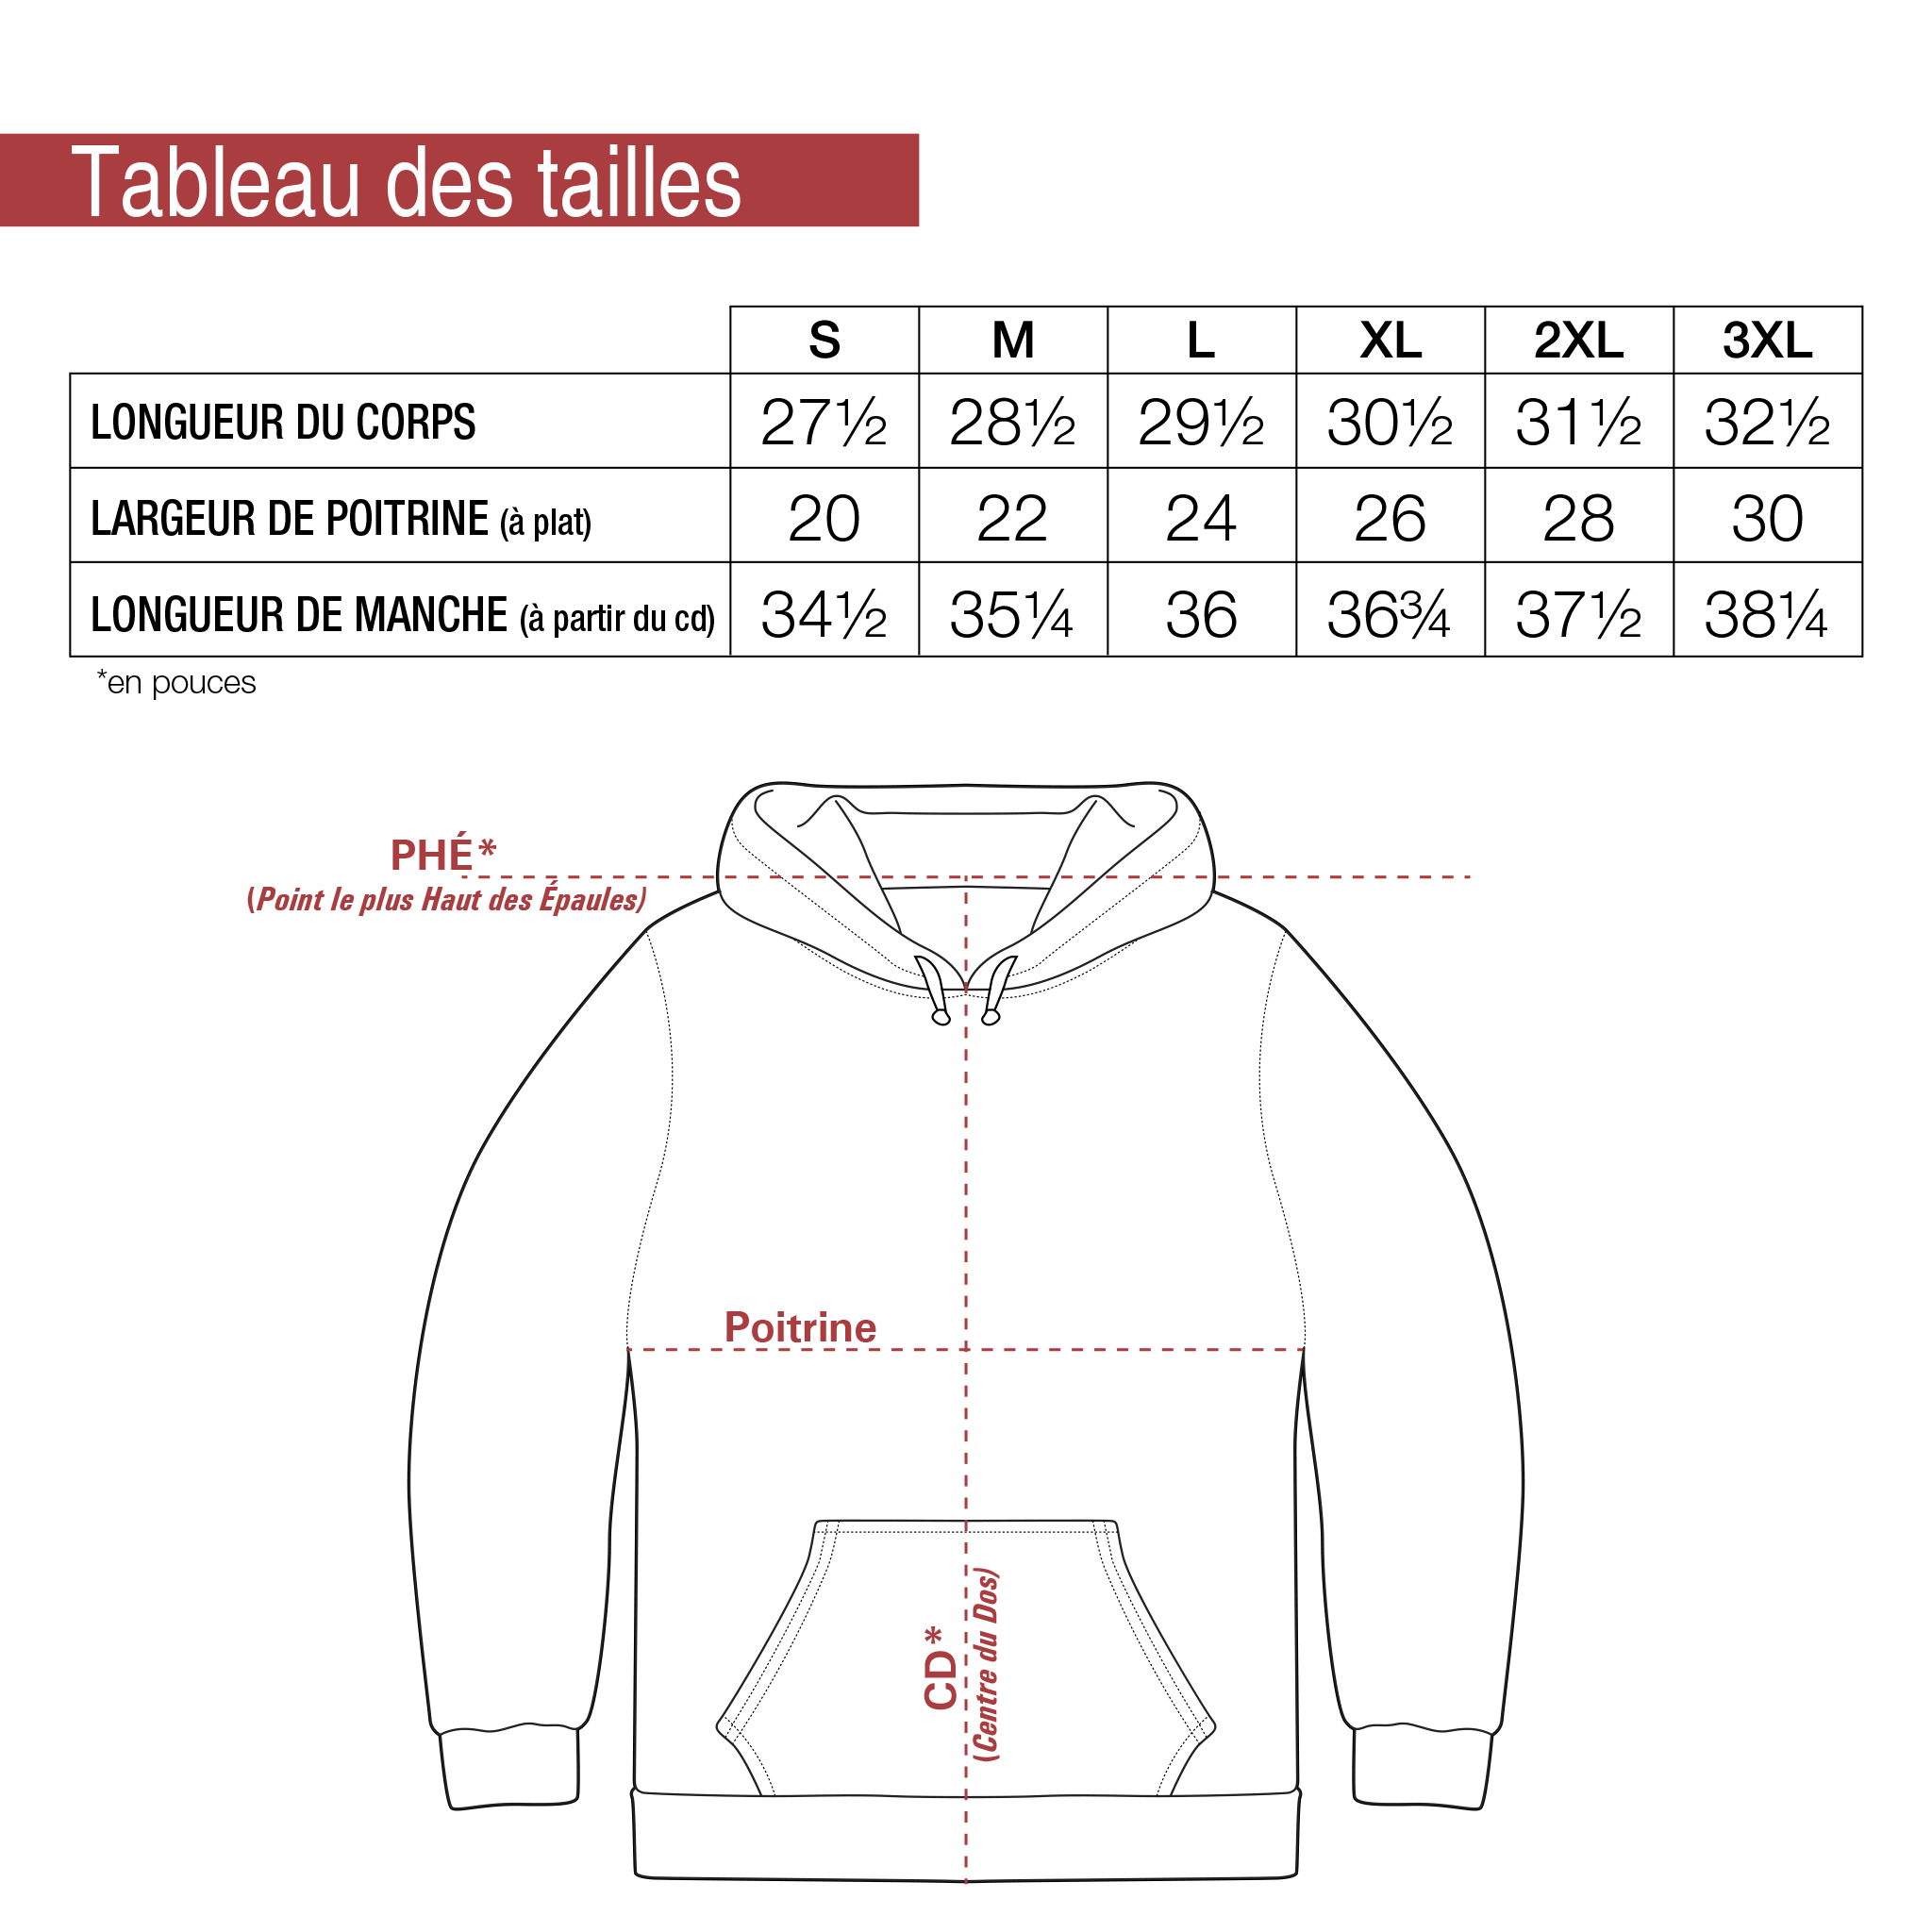 Tableau-taille-ATCF2500_62b62f1c-af00-4e74-a965-dee08899a6cb.png